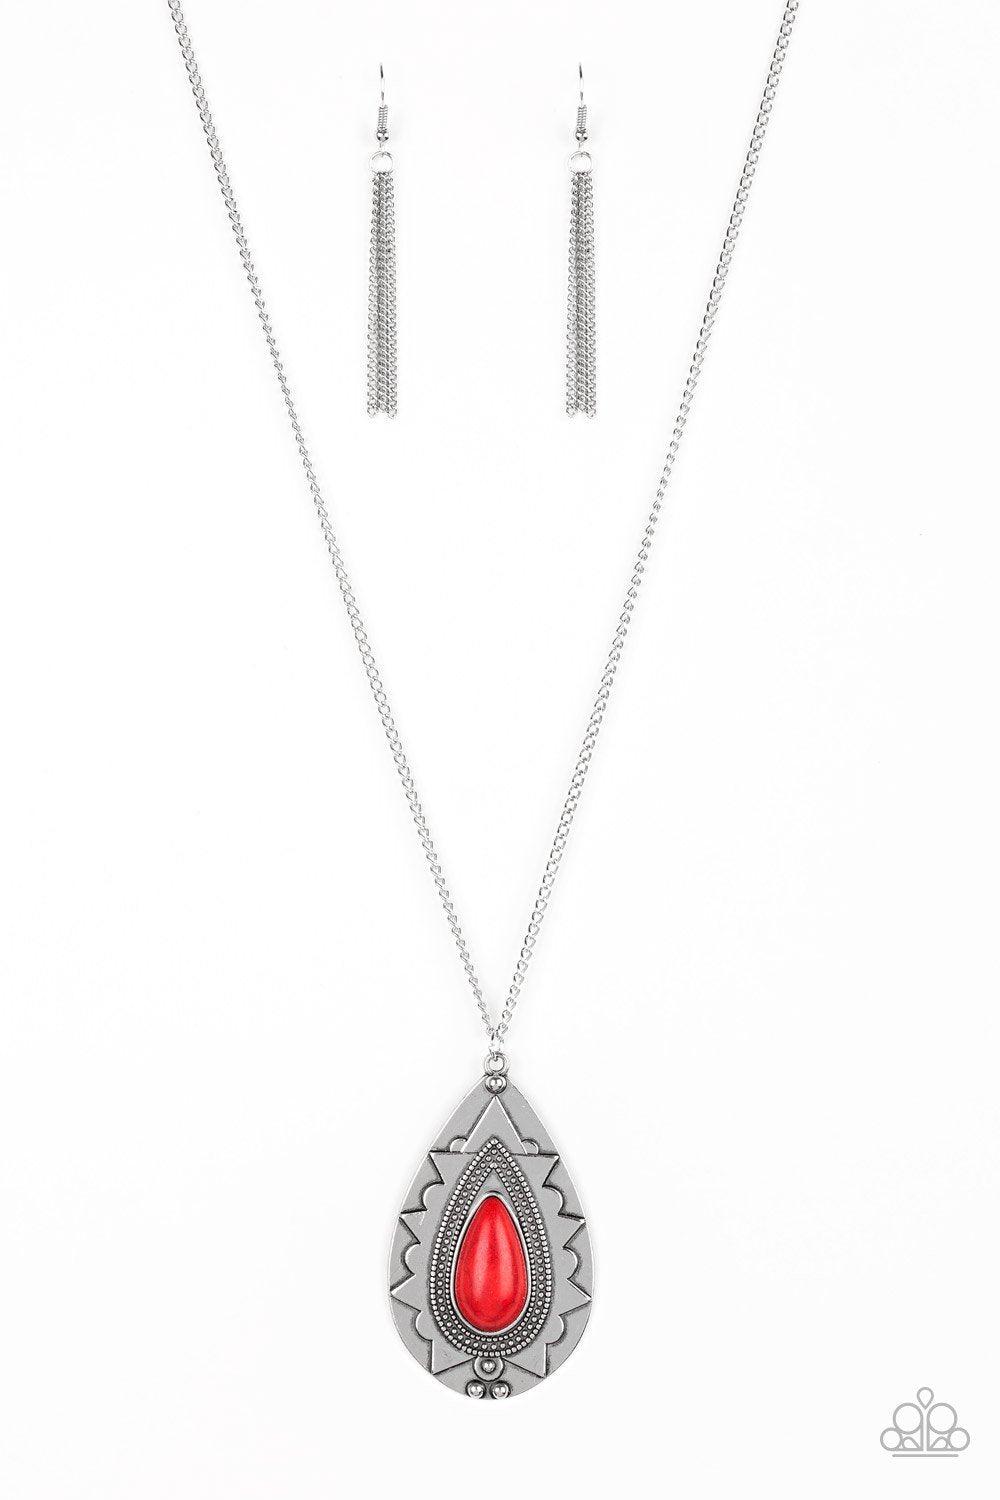 Sedona Solstice Red Stone Necklace - Paparazzi Accessories- lightbox - CarasShop.com - $5 Jewelry by Cara Jewels